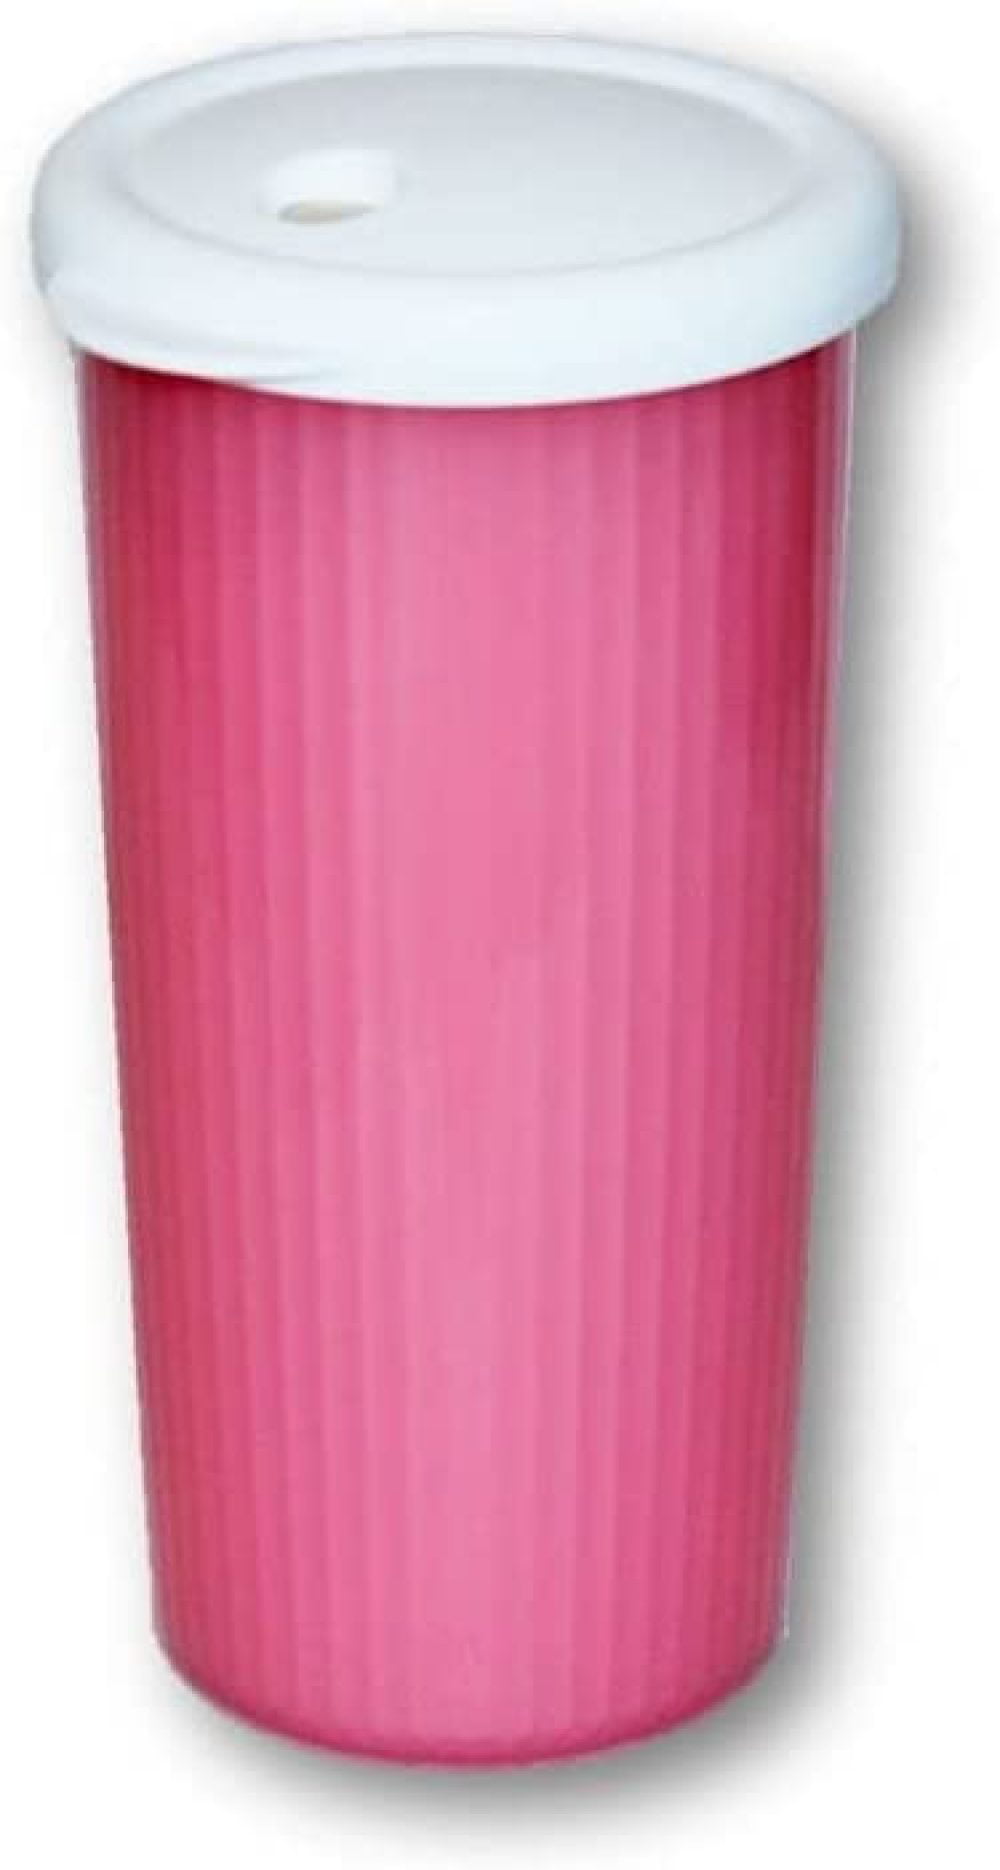 NEW TUPPERWARE INSULATED TUMBLER WITH DRIPLESS STRAW SEAL 24 OZ HOT PINK WHITE 